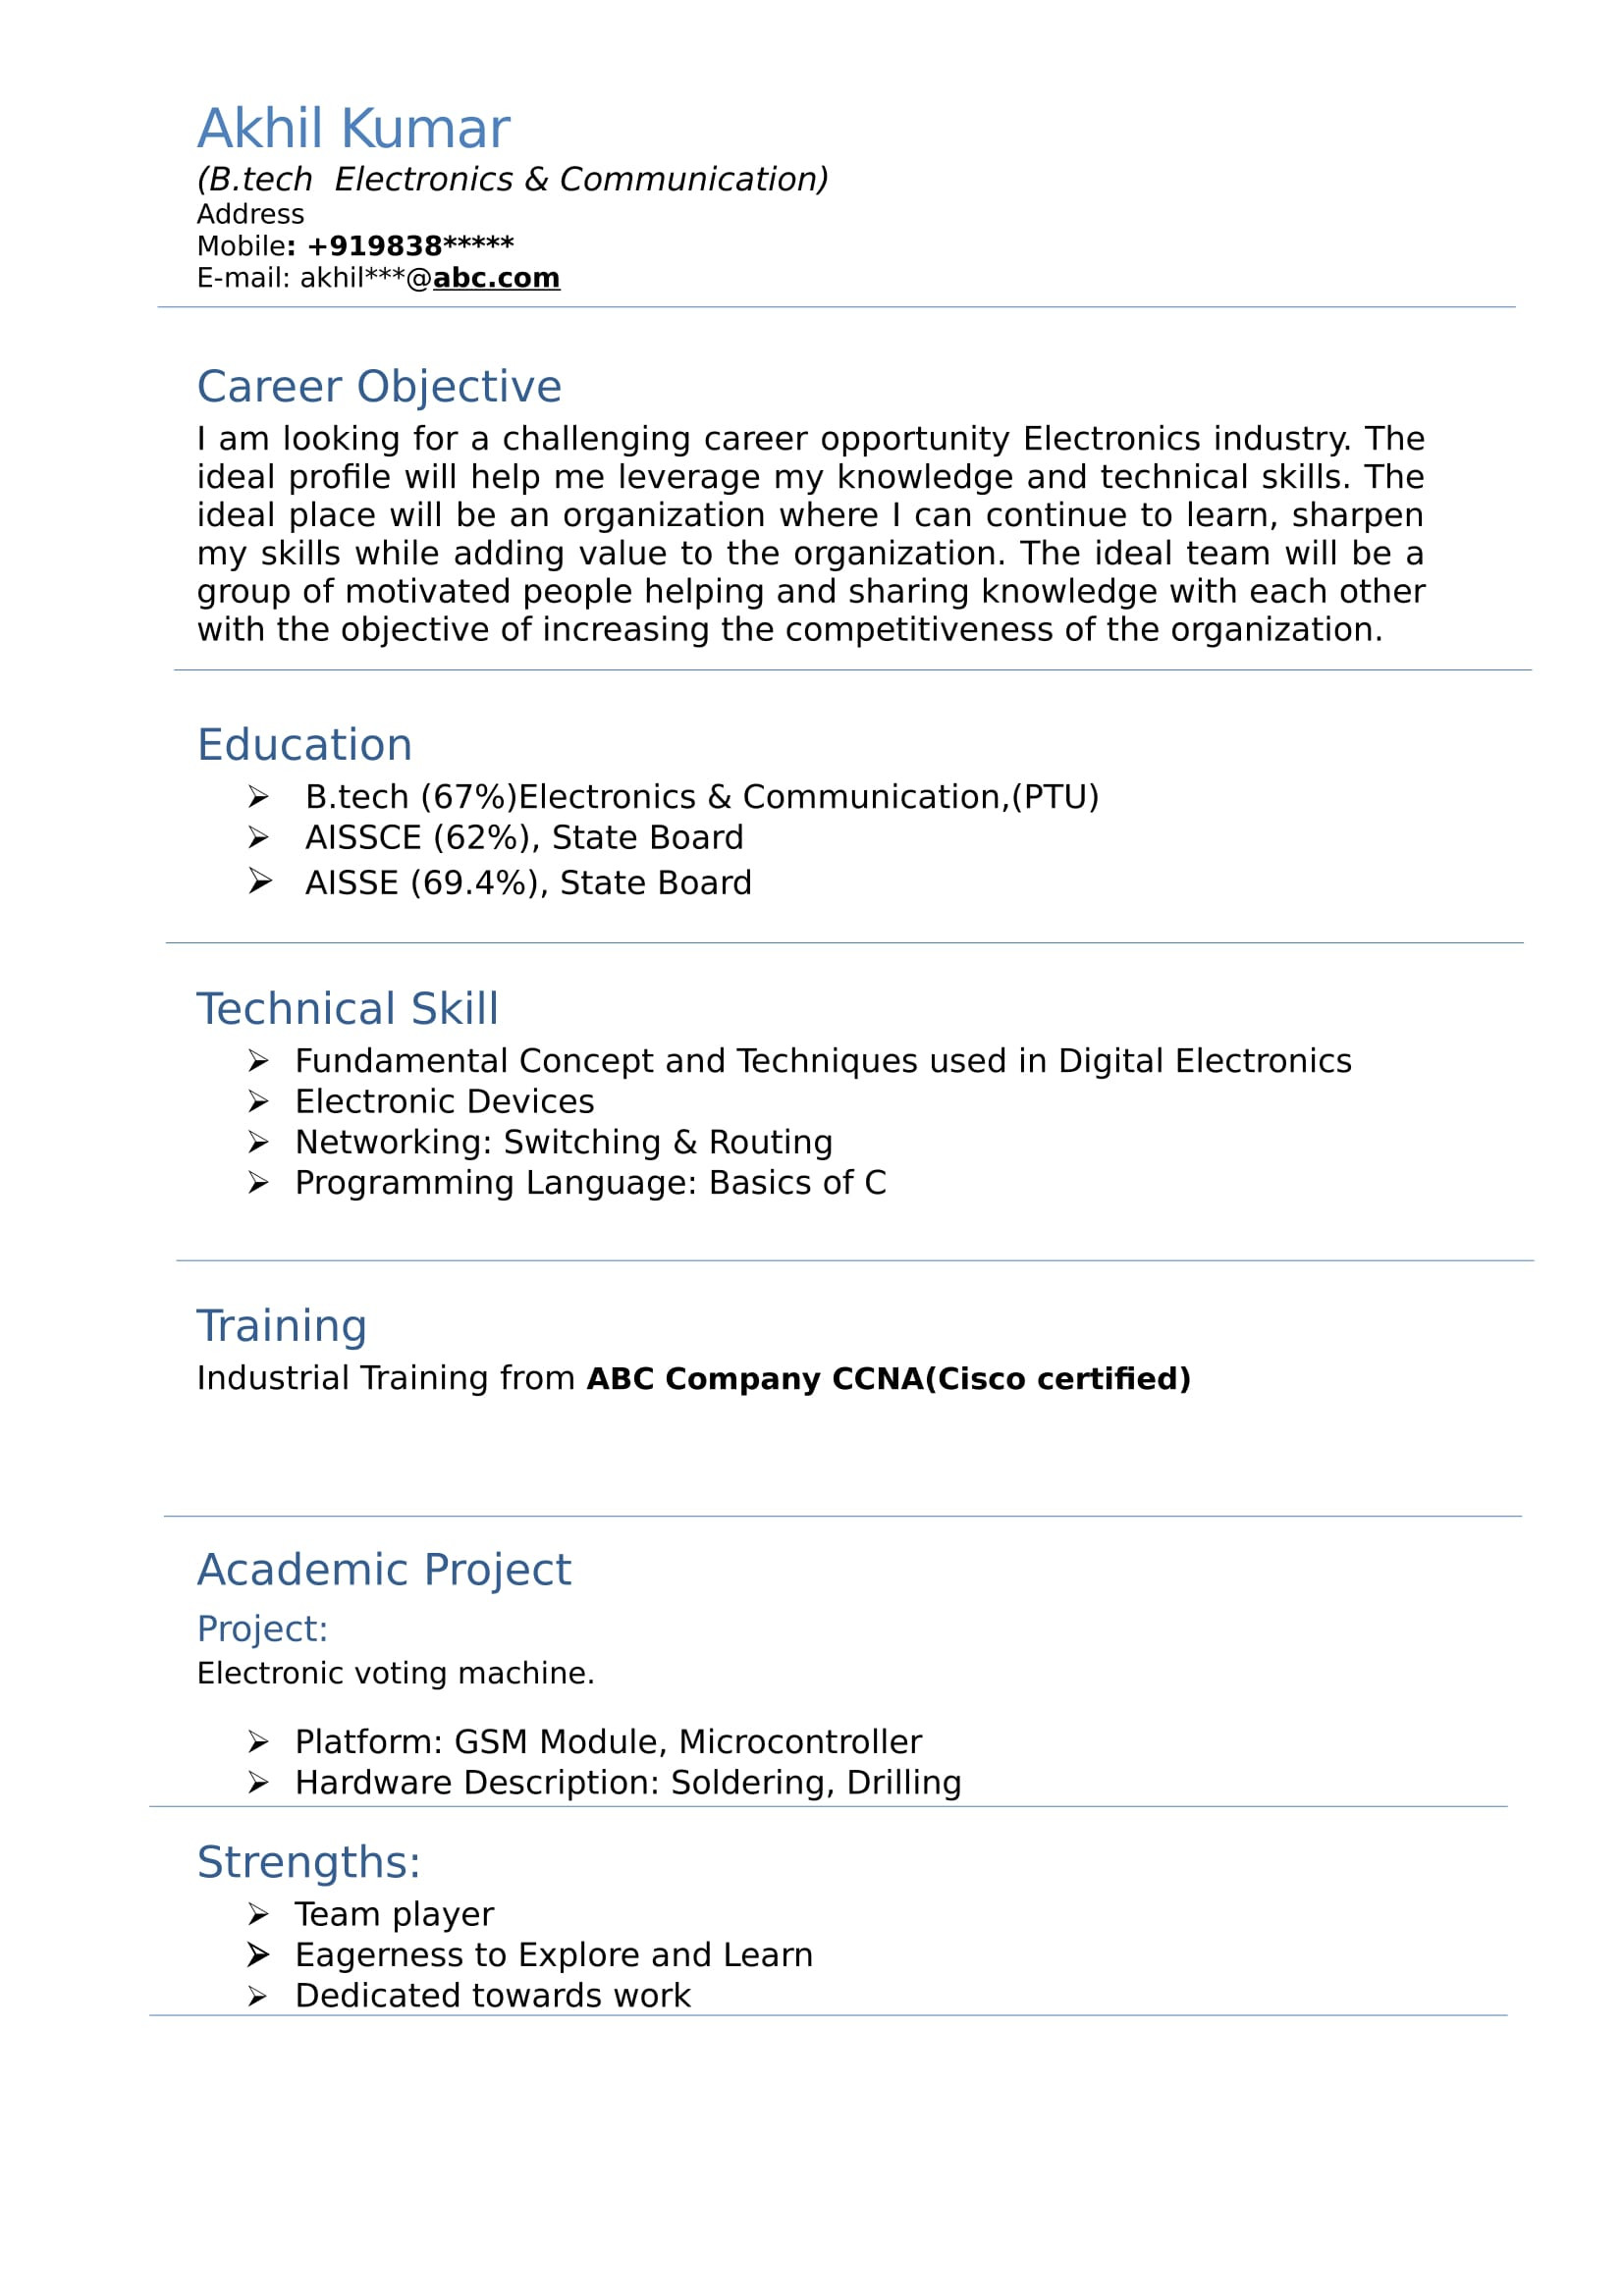 Sample Resume for Electronics and Communication Engineer Fresher Resume Templates for Electronics and Munication